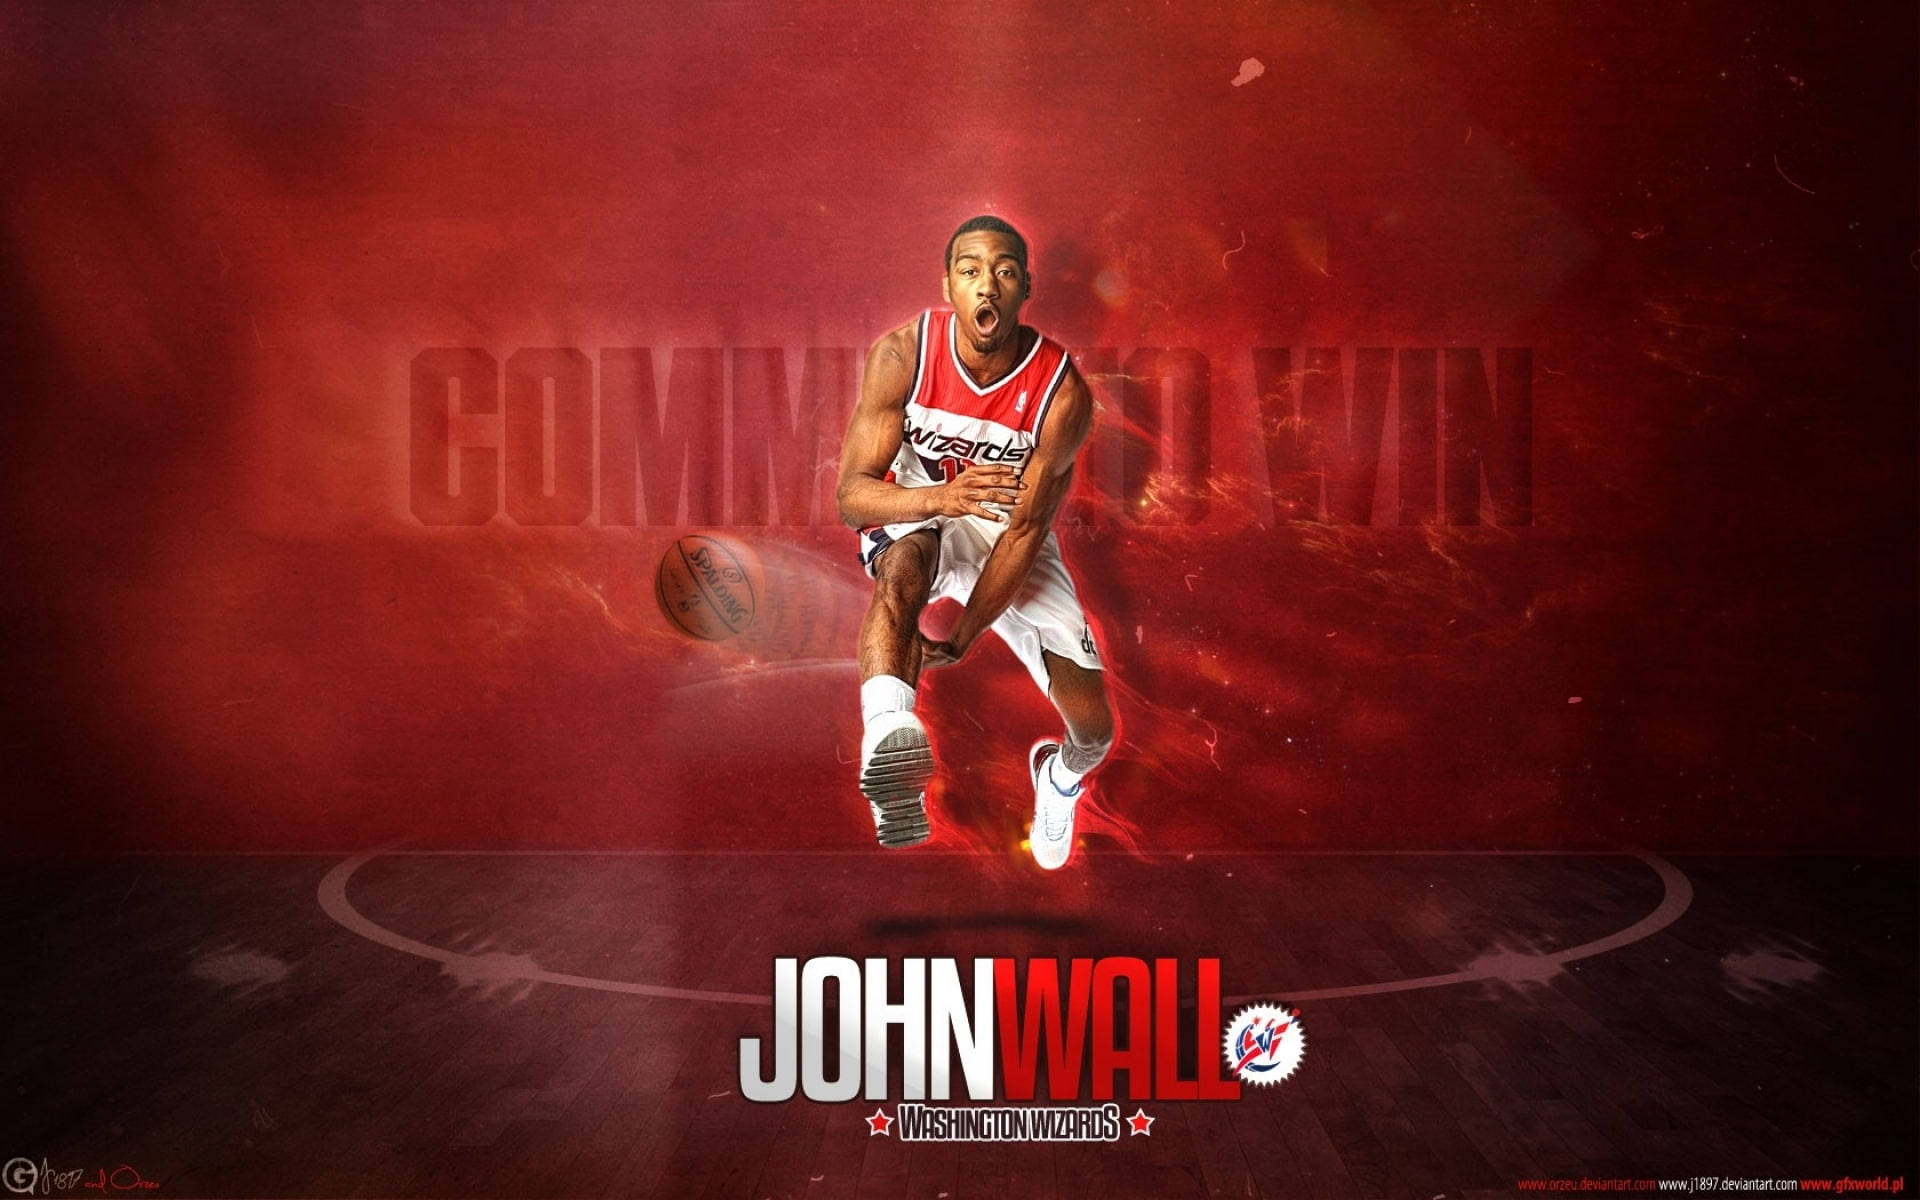 Dynamic Action In The Washington Wizards Game Wallpaper